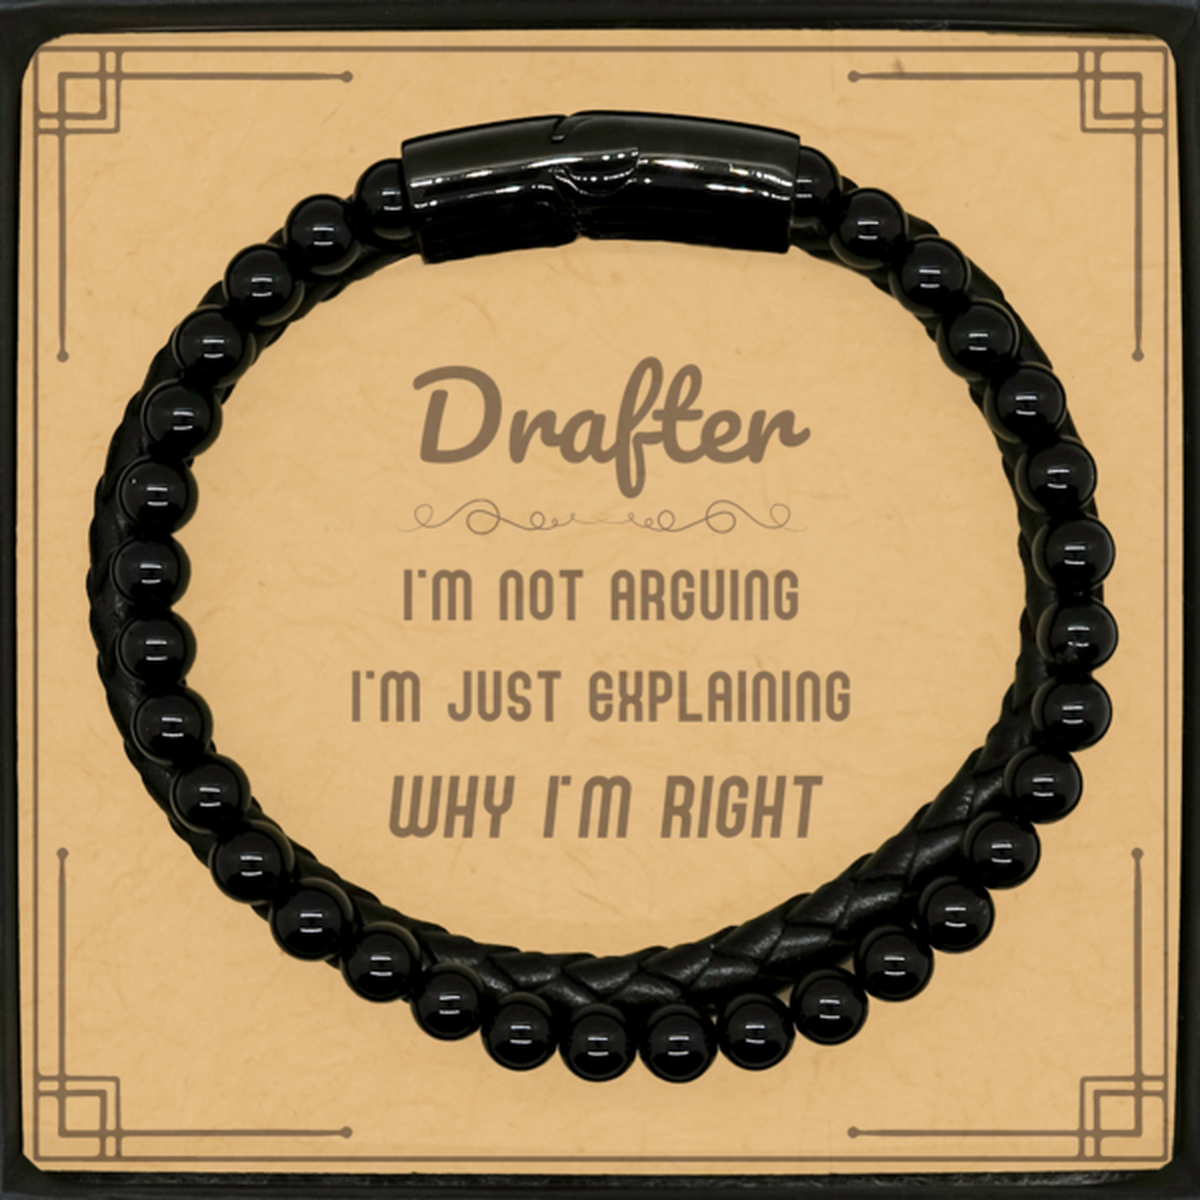 Drafter I'm not Arguing. I'm Just Explaining Why I'm RIGHT Stone Leather Bracelets, Funny Saying Quote Drafter Gifts For Drafter Message Card Graduation Birthday Christmas Gifts for Men Women Coworker